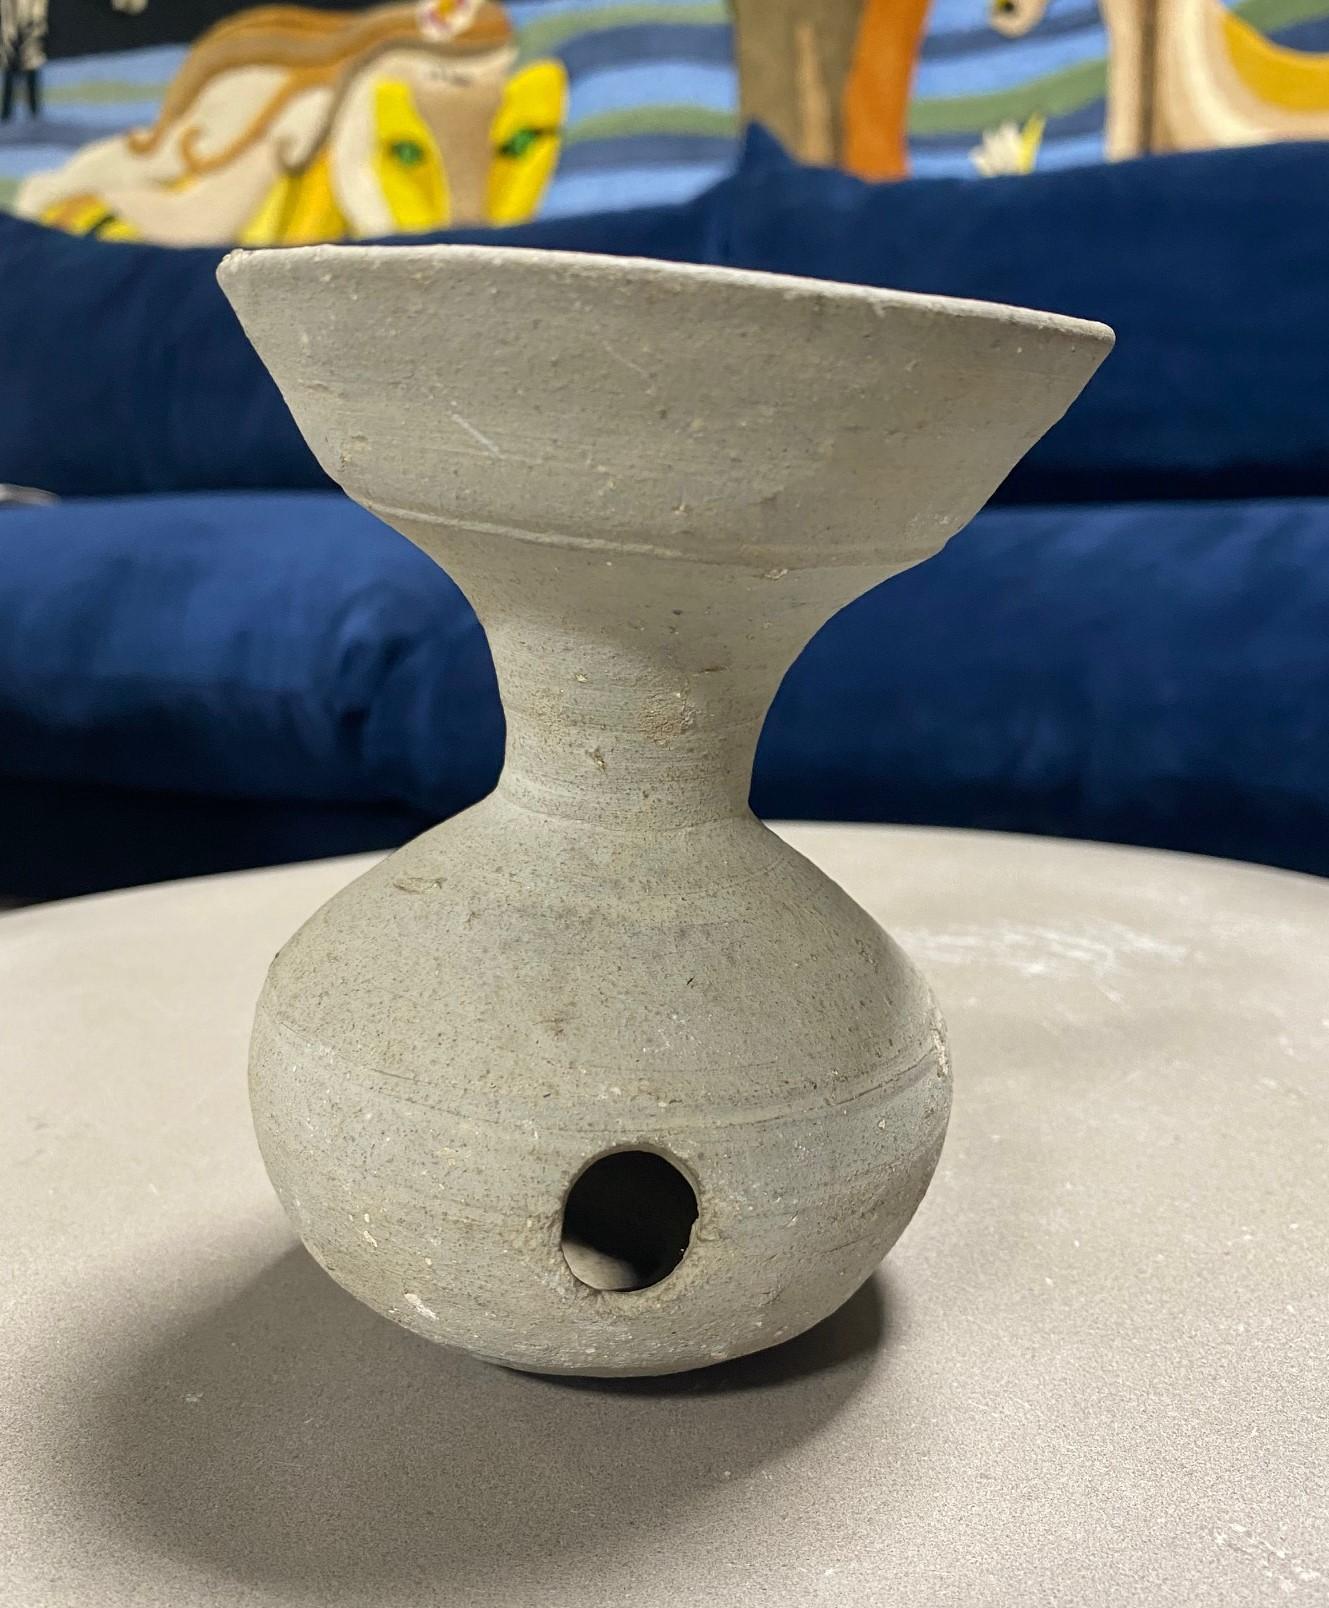 A wonderful, unique, and handcrafted piece of ancient Japanese Sueki Sue ware pottery dating back to the 500-600s (6th-7th century). Sueki/ Sue pottery was a blue-gray form of stoneware pottery fired at high temperatures. It was produced in Japan